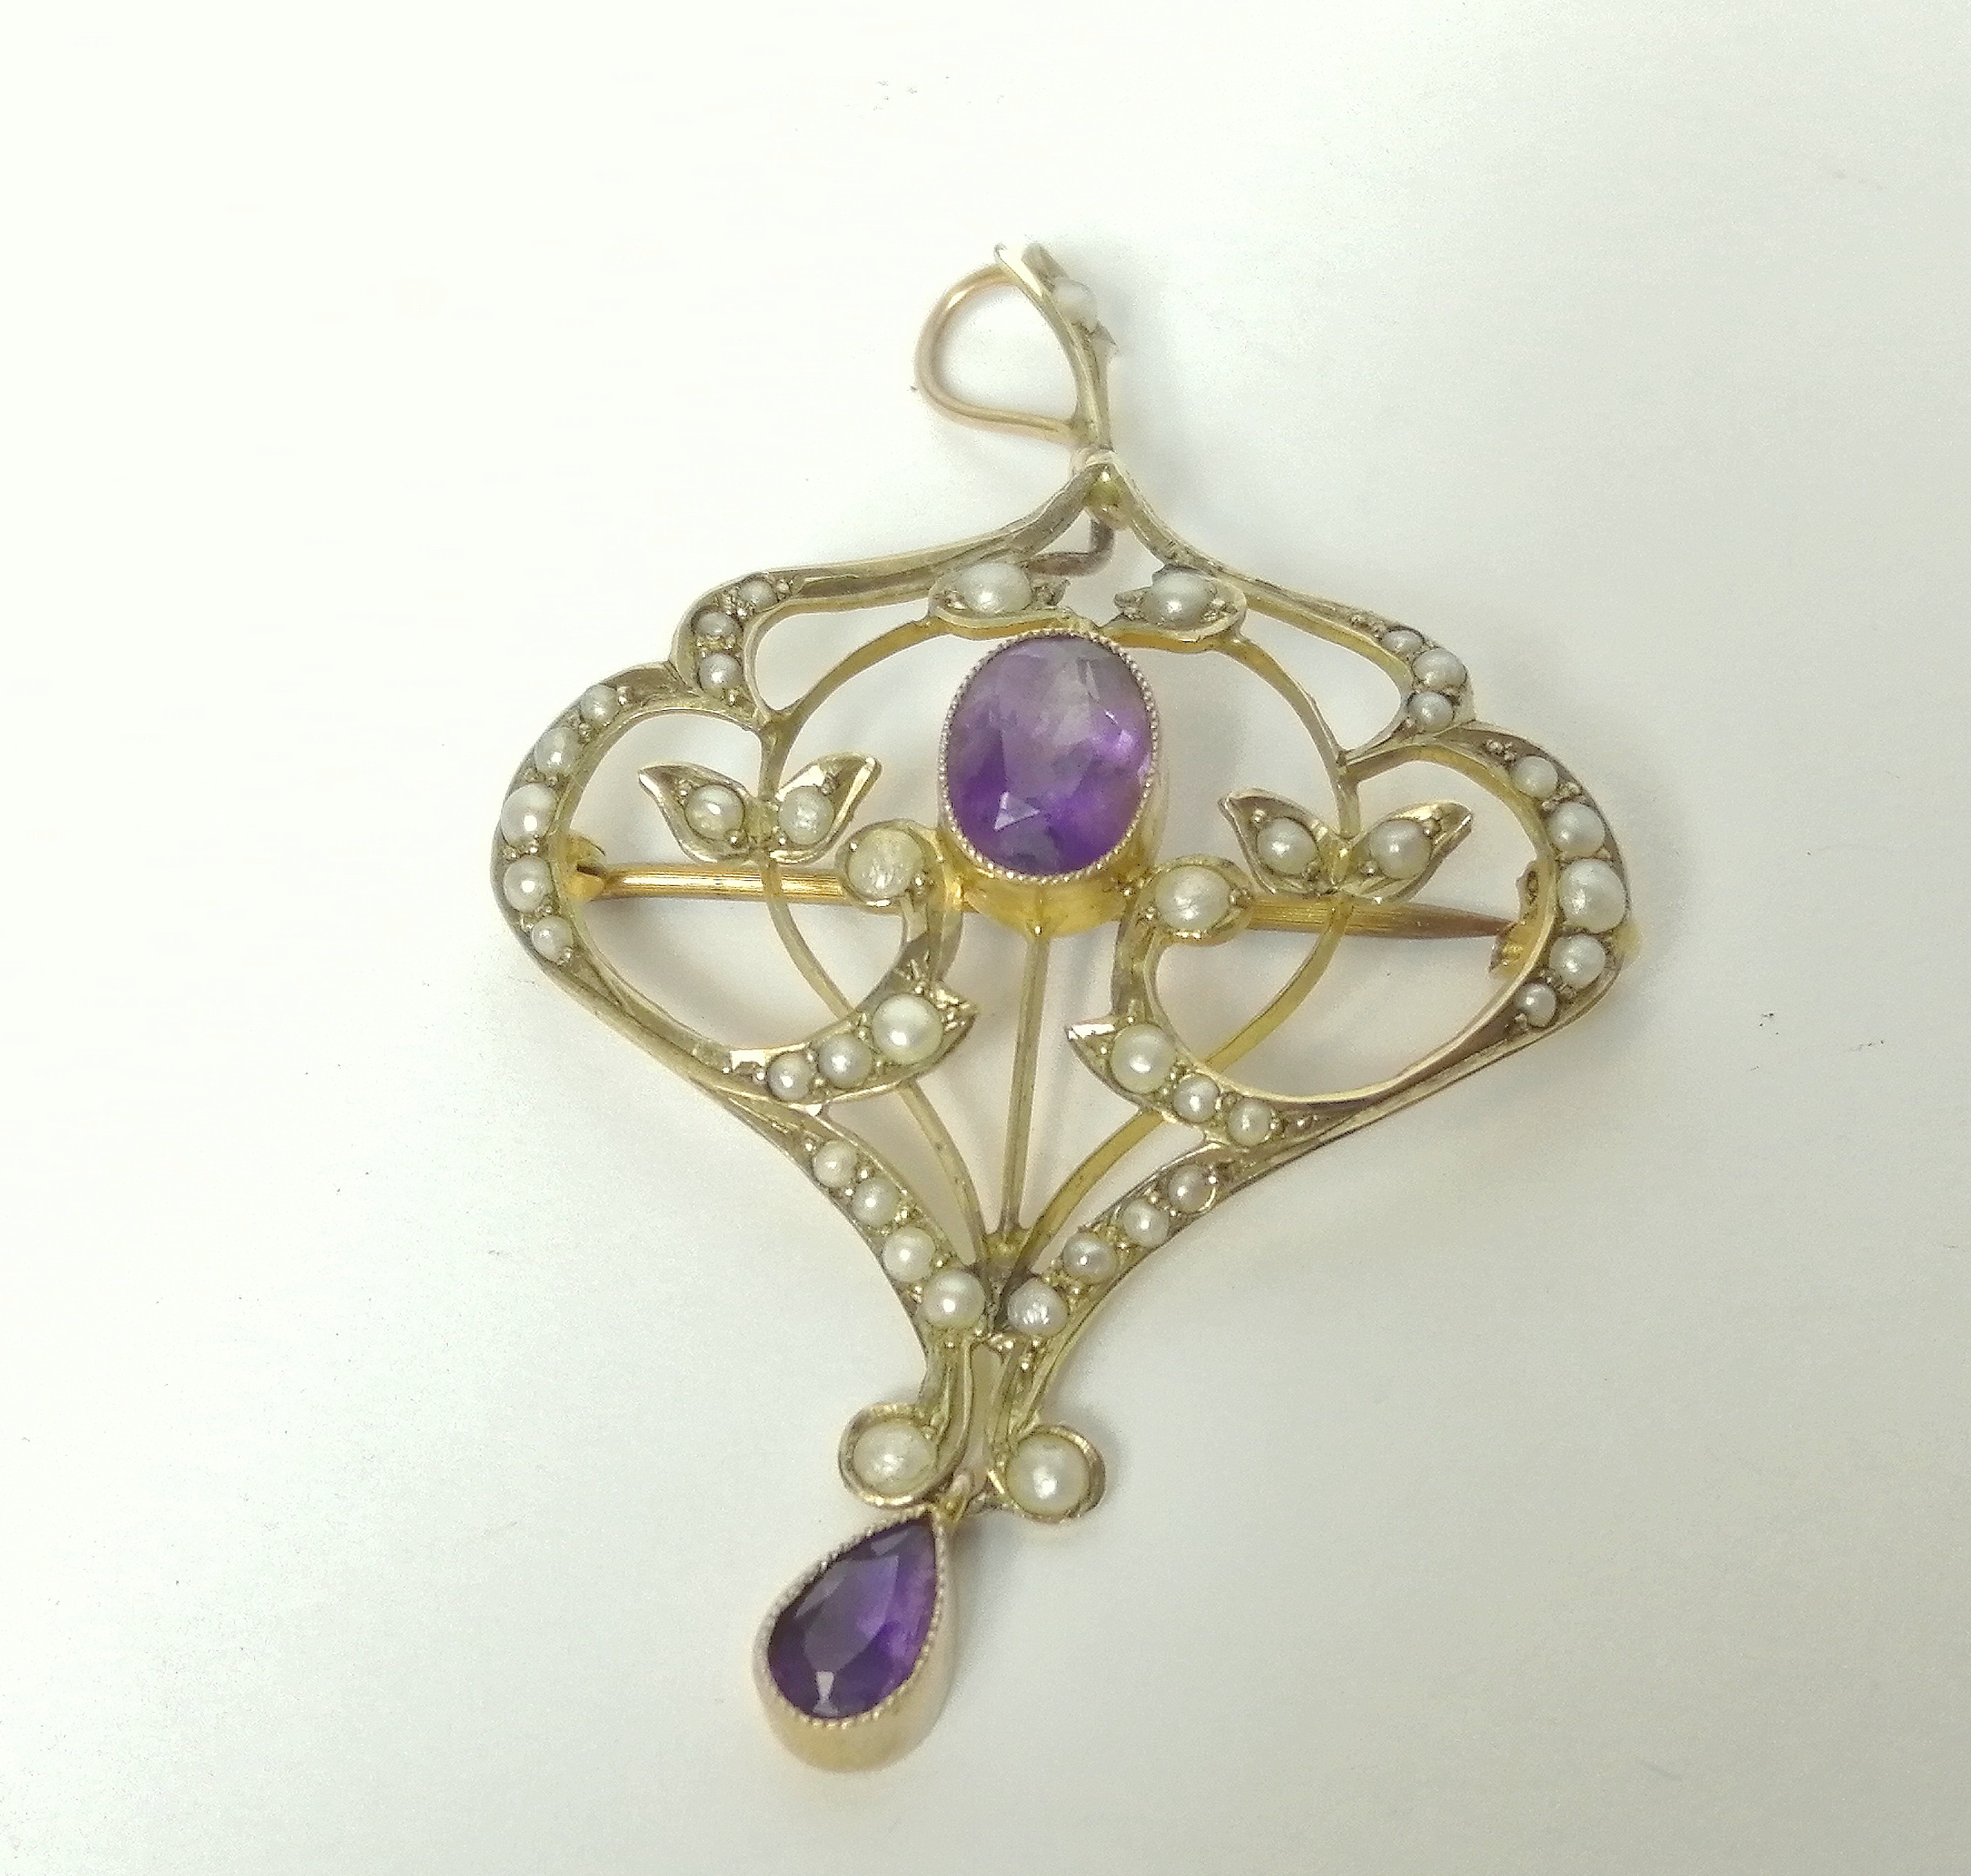 Edwardian gold pendant of Art Nouveau style with amethyst and pearls, '9ct'.